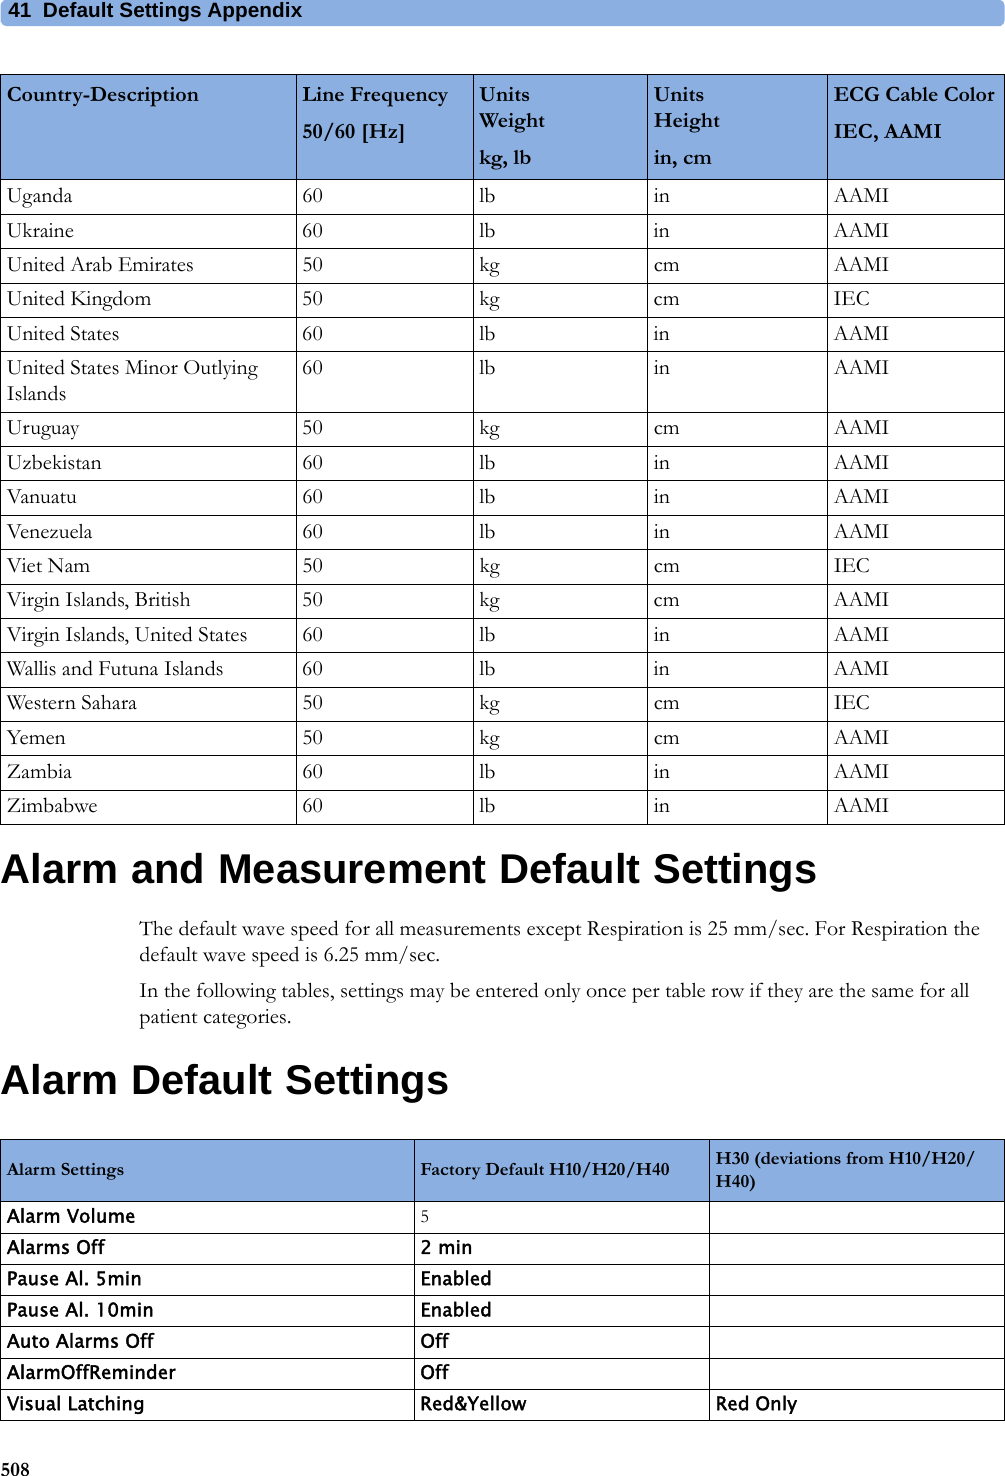 41 Default Settings Appendix508Alarm and Measurement Default SettingsThe default wave speed for all measurements except Respiration is 25 mm/sec. For Respiration the default wave speed is 6.25 mm/sec.In the following tables, settings may be entered only once per table row if they are the same for all patient categories.Alarm Default SettingsUganda 60 lb in AAMIUkraine 60 lb in AAMIUnited Arab Emirates 50 kg cm AAMIUnited Kingdom 50 kg cm IECUnited States 60 lb in AAMIUnited States Minor Outlying Islands60 lb in AAMIUruguay 50 kg cm AAMIUzbekistan 60 lb in AAMIVanuatu 60 lb in AAMIVenezuela 60 lb in AAMIViet Nam 50 kg cm IECVirgin Islands, British 50 kg cm AAMIVirgin Islands, United States 60 lb in AAMIWallis and Futuna Islands 60 lb in AAMIWestern Sahara 50 kg cm IECYemen 50 kg cm AAMIZambia 60 lb in AAMIZimbabwe 60 lb in AAMICountry-Description Line Frequency50/60 [Hz]UnitsWeightkg, lbUnitsHeightin, cmECG Cable ColorIEC, AAMIAlarm Settings Factory Default H10/H20/H40 H30 (deviations from H10/H20/H40)Alarm Volume 5Alarms Off 2 minPause Al. 5min EnabledPause Al. 10min EnabledAuto Alarms Off OffAlarmOffReminder OffVisual Latching Red&amp;Yellow Red Only